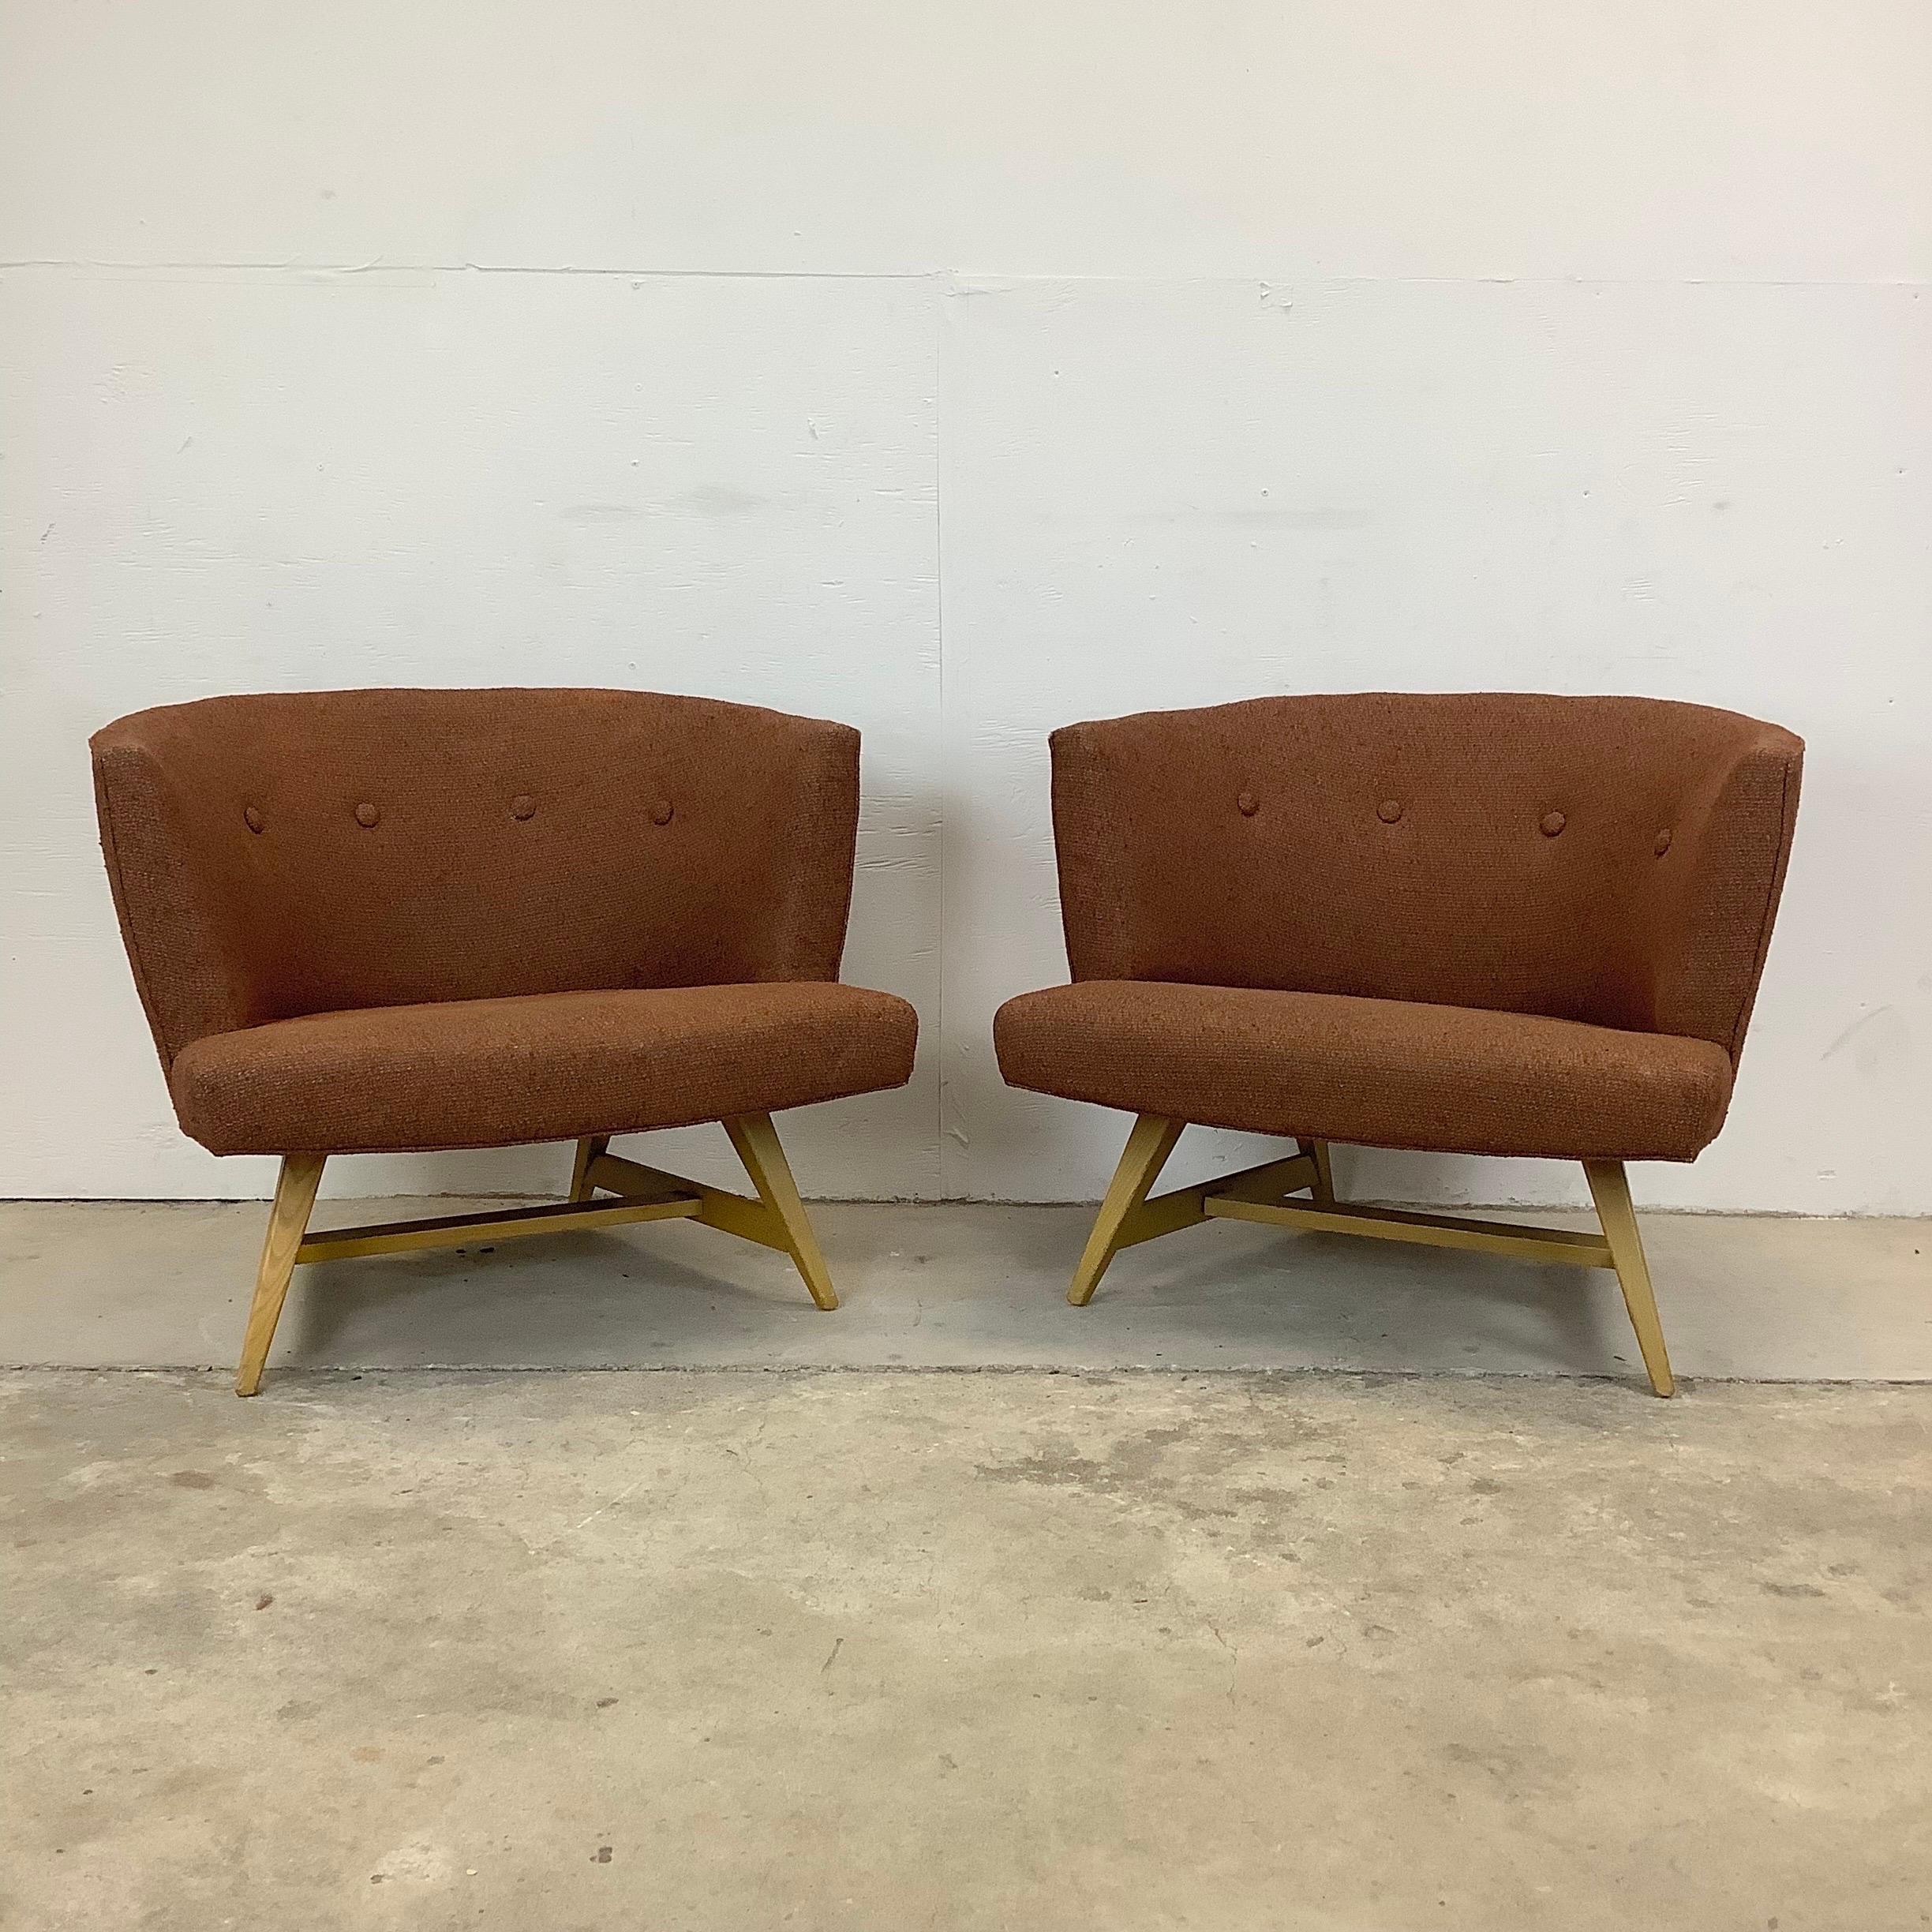 This impressive pair of matching Mid-Century Modern lounge chairs feature rounded barrel like seat backs with vintage brown upholstery and vintage wood frames. The comfortable proportions of this matching pair make them excellent accent chairs for